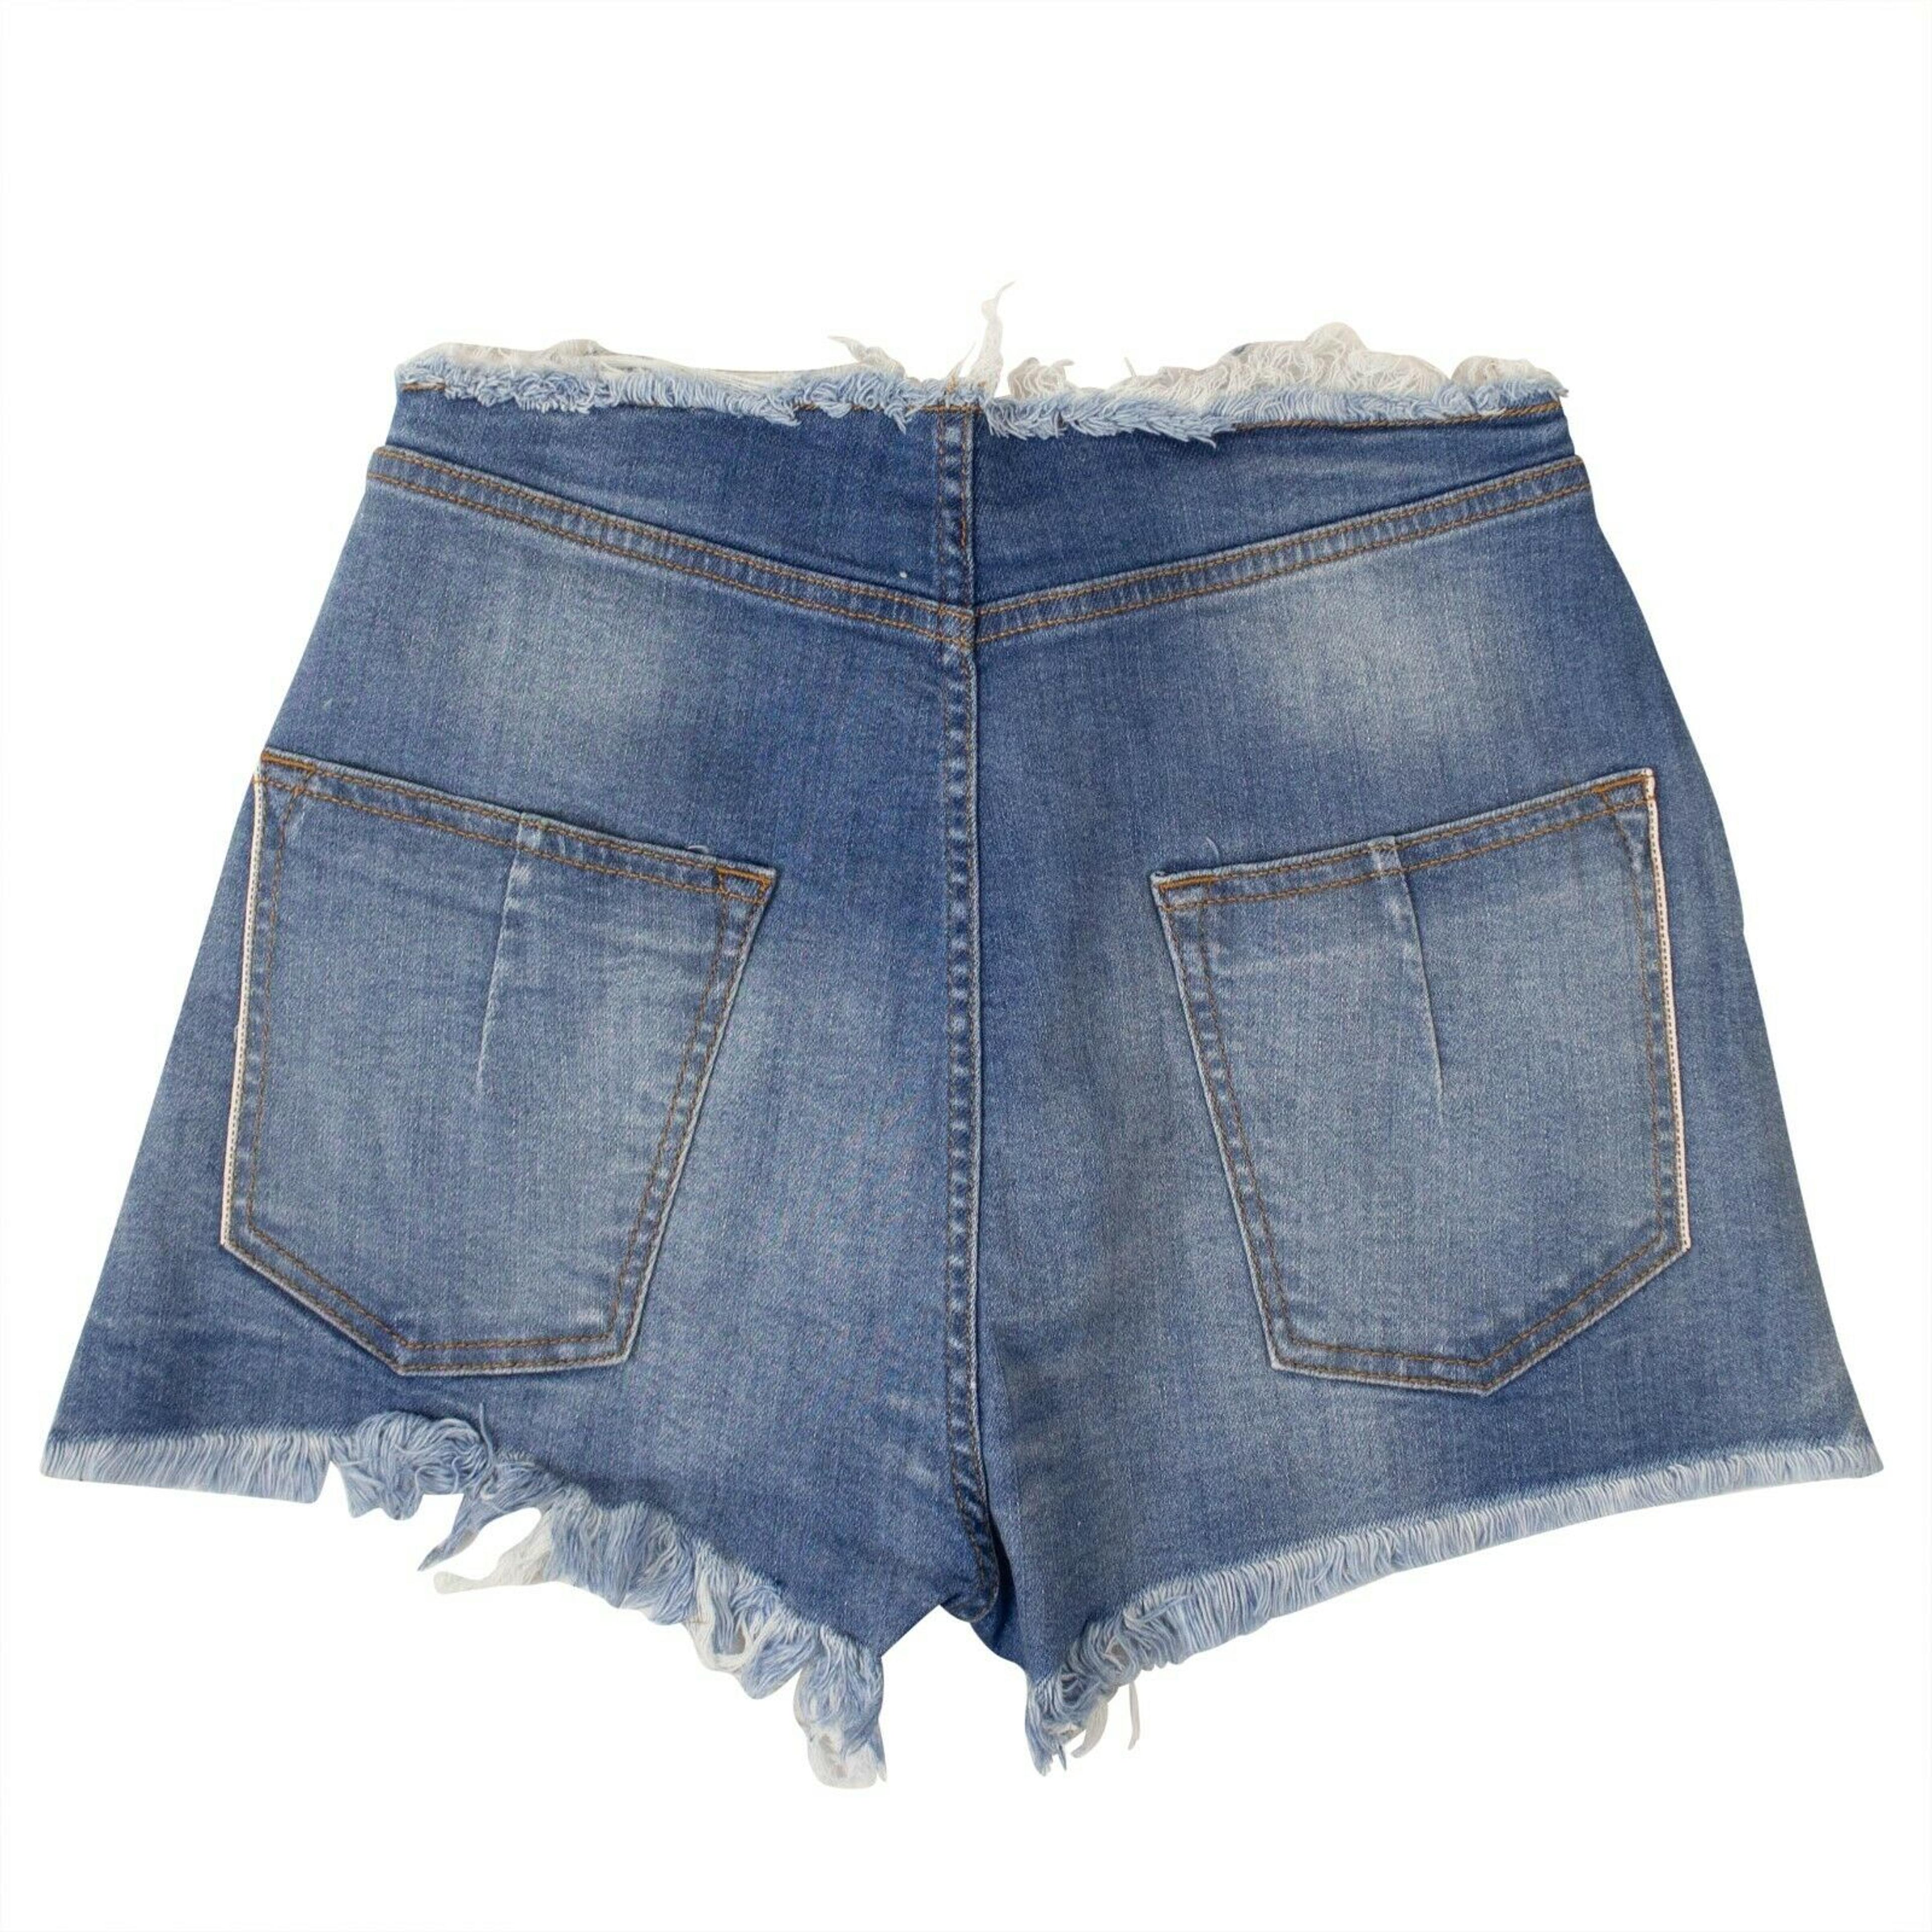 Alternate View 2 of Denim Lace-Up Shorts